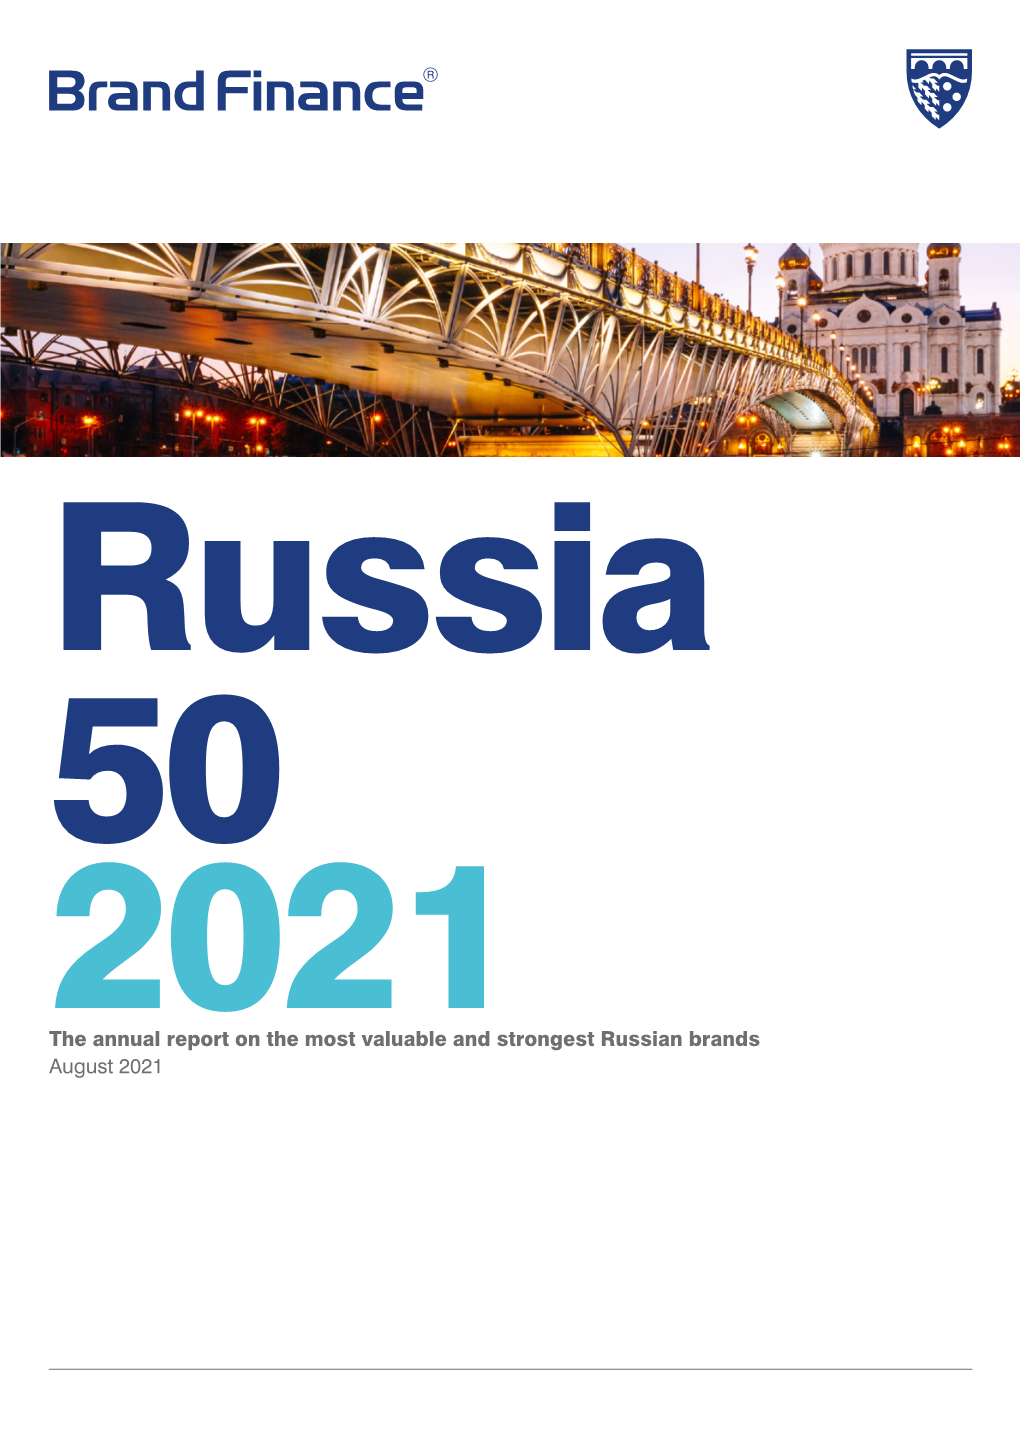 The Annual Report on the Most Valuable and Strongest Russian Brands August 2021 Contents